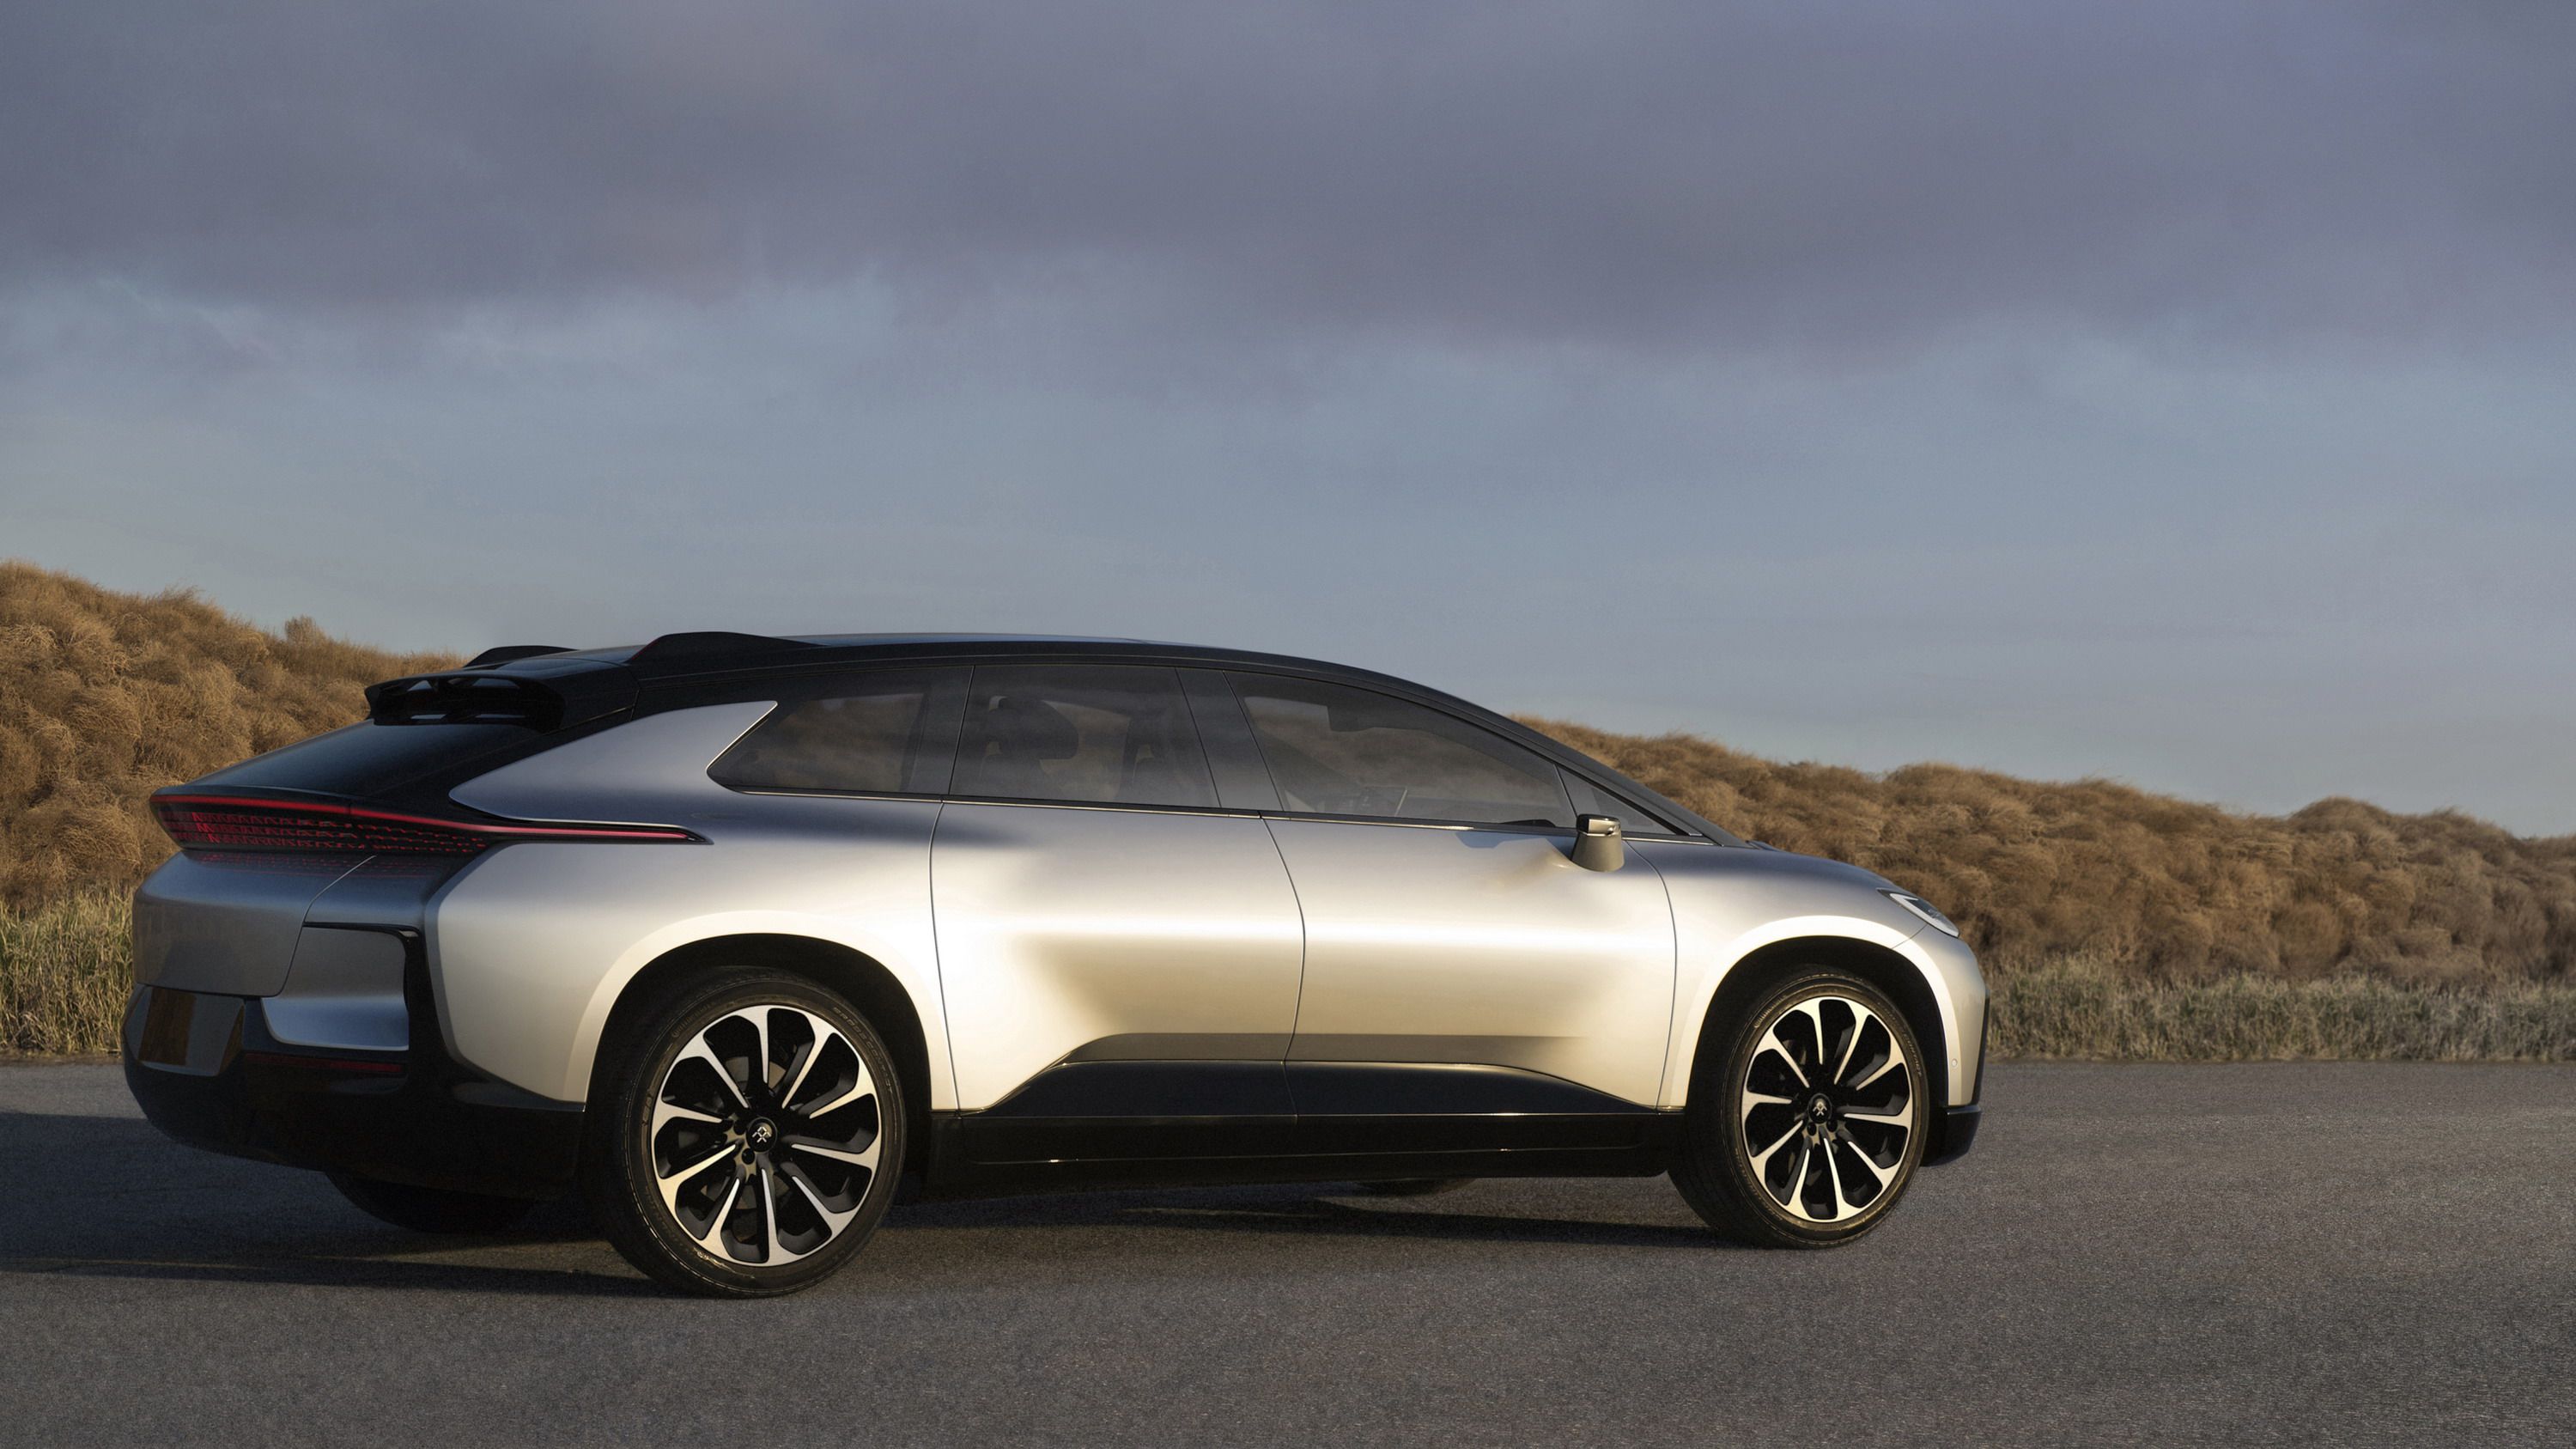 2018 Faraday Future Gets GoFundMe Campaign to Keep Employees, But Diagnosis Looks Terminal